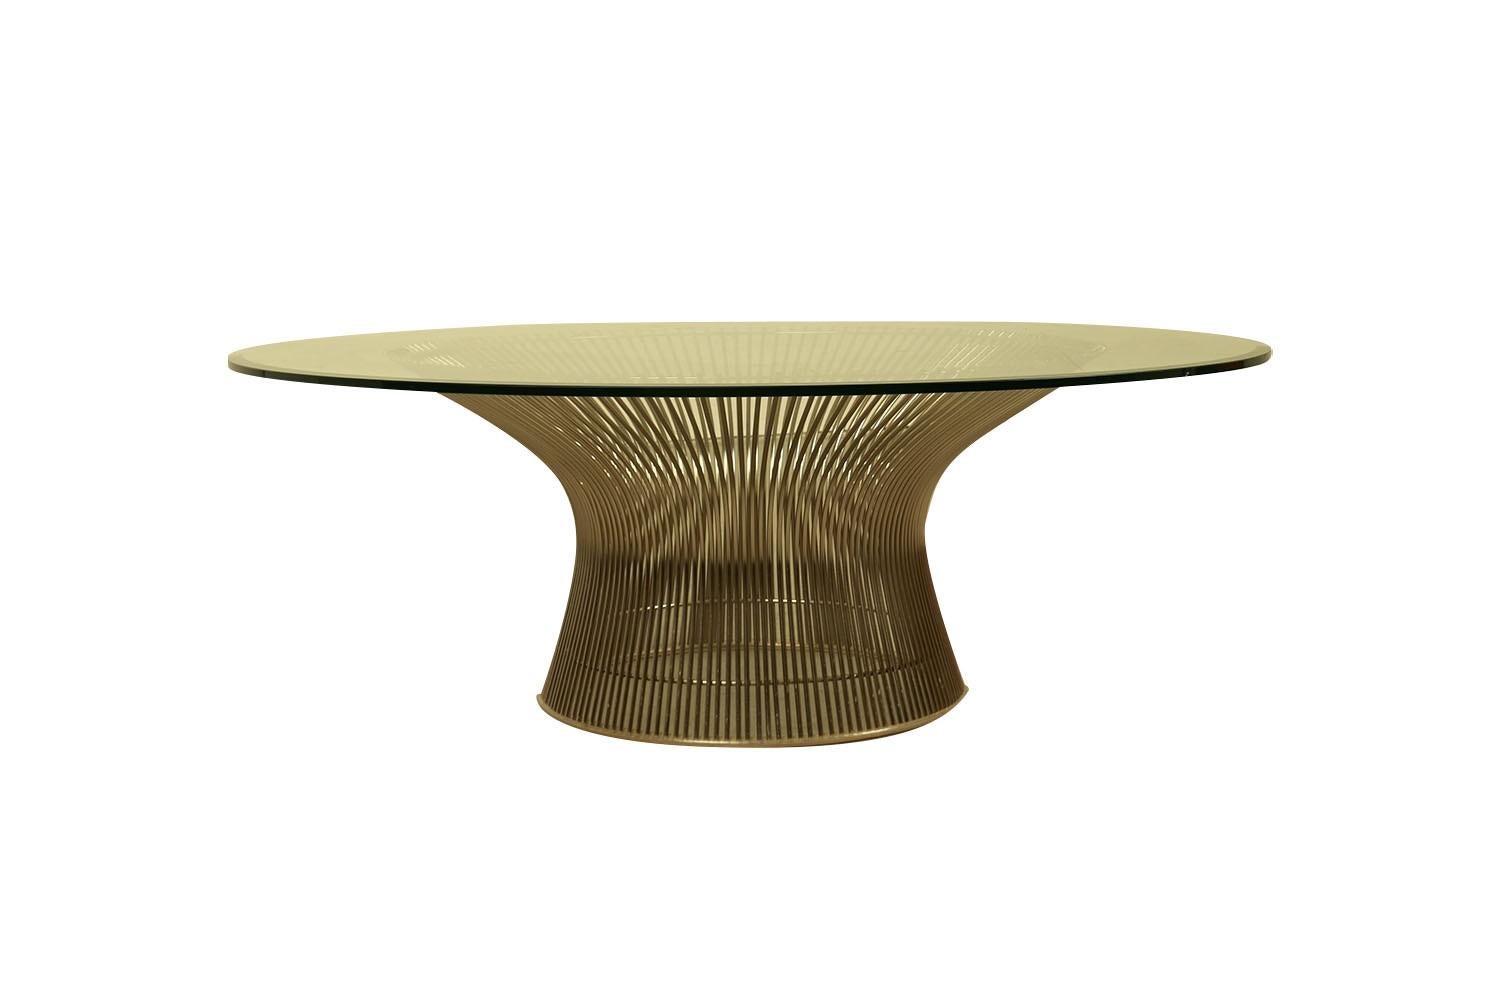 A mid-century iconic, stunning, authentic original, vintage Platner circular wire glass coffee table designed by American architect and interior designer Warren Platner (1919-2006)  for Knoll International circa 1970’s, in the United  States.  A